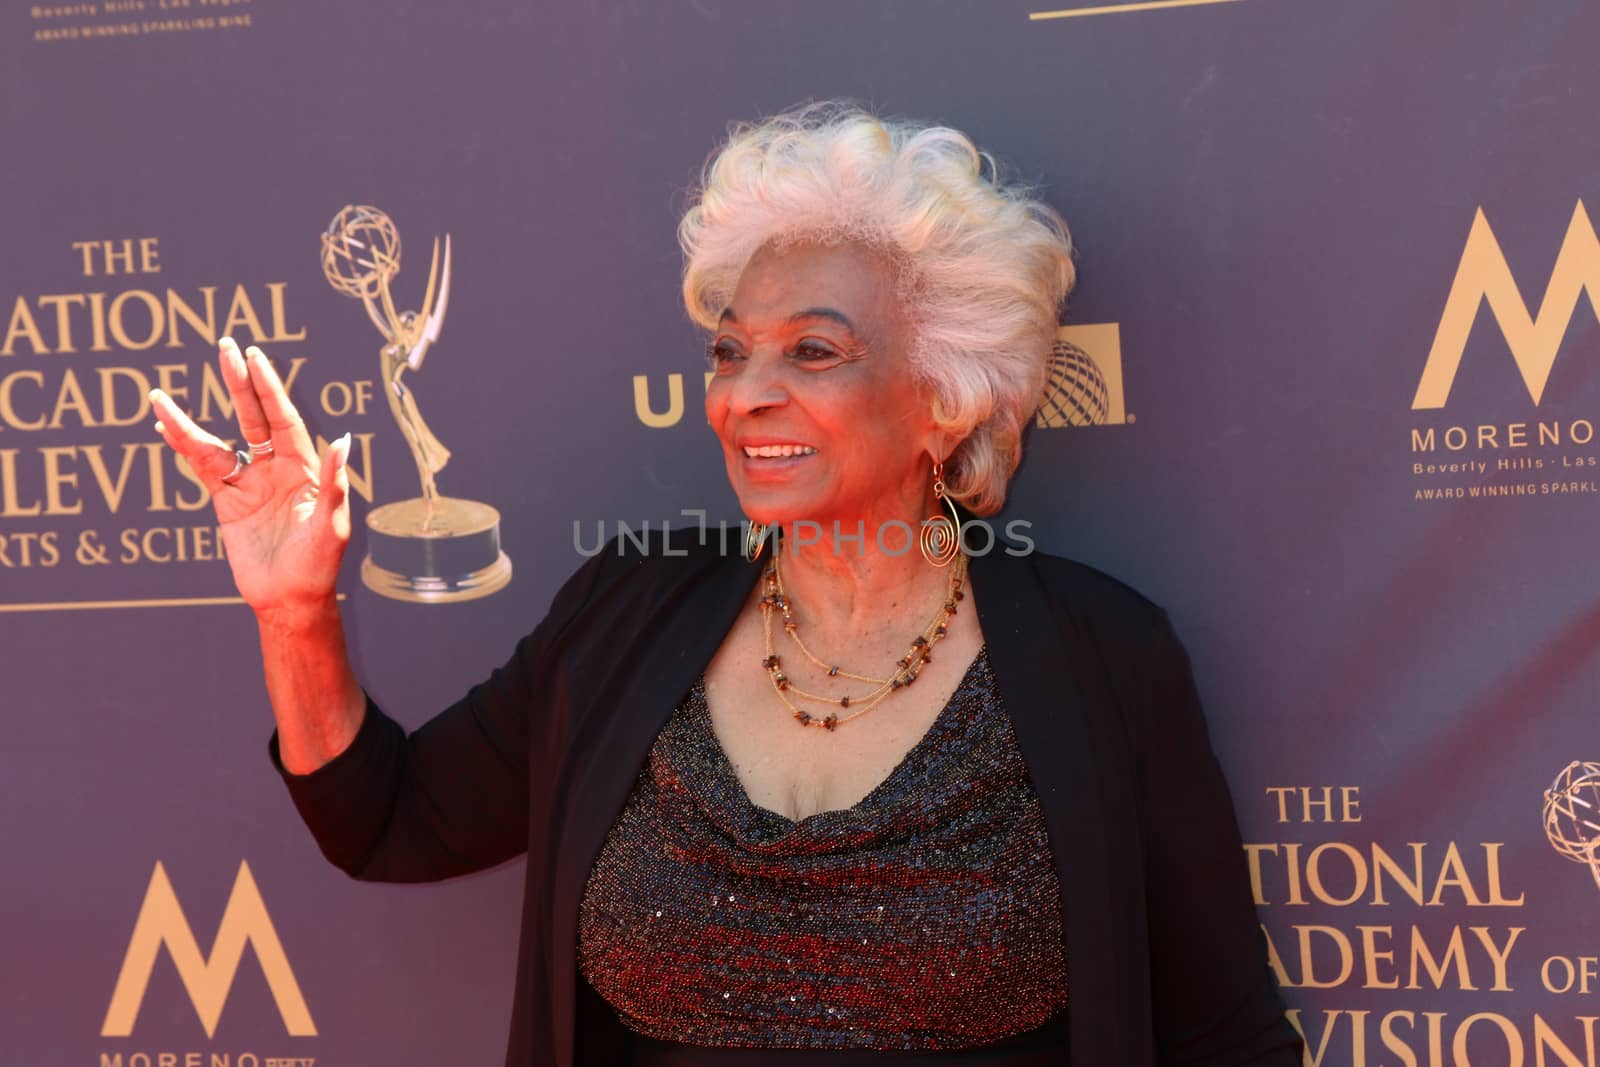 Nichelle Nichols
at the 44th Daytime Emmy Awards - Arrivals, Pasadena Civic Auditorium, Pasadena, CA 04-30-17/ImageCollect by ImageCollect